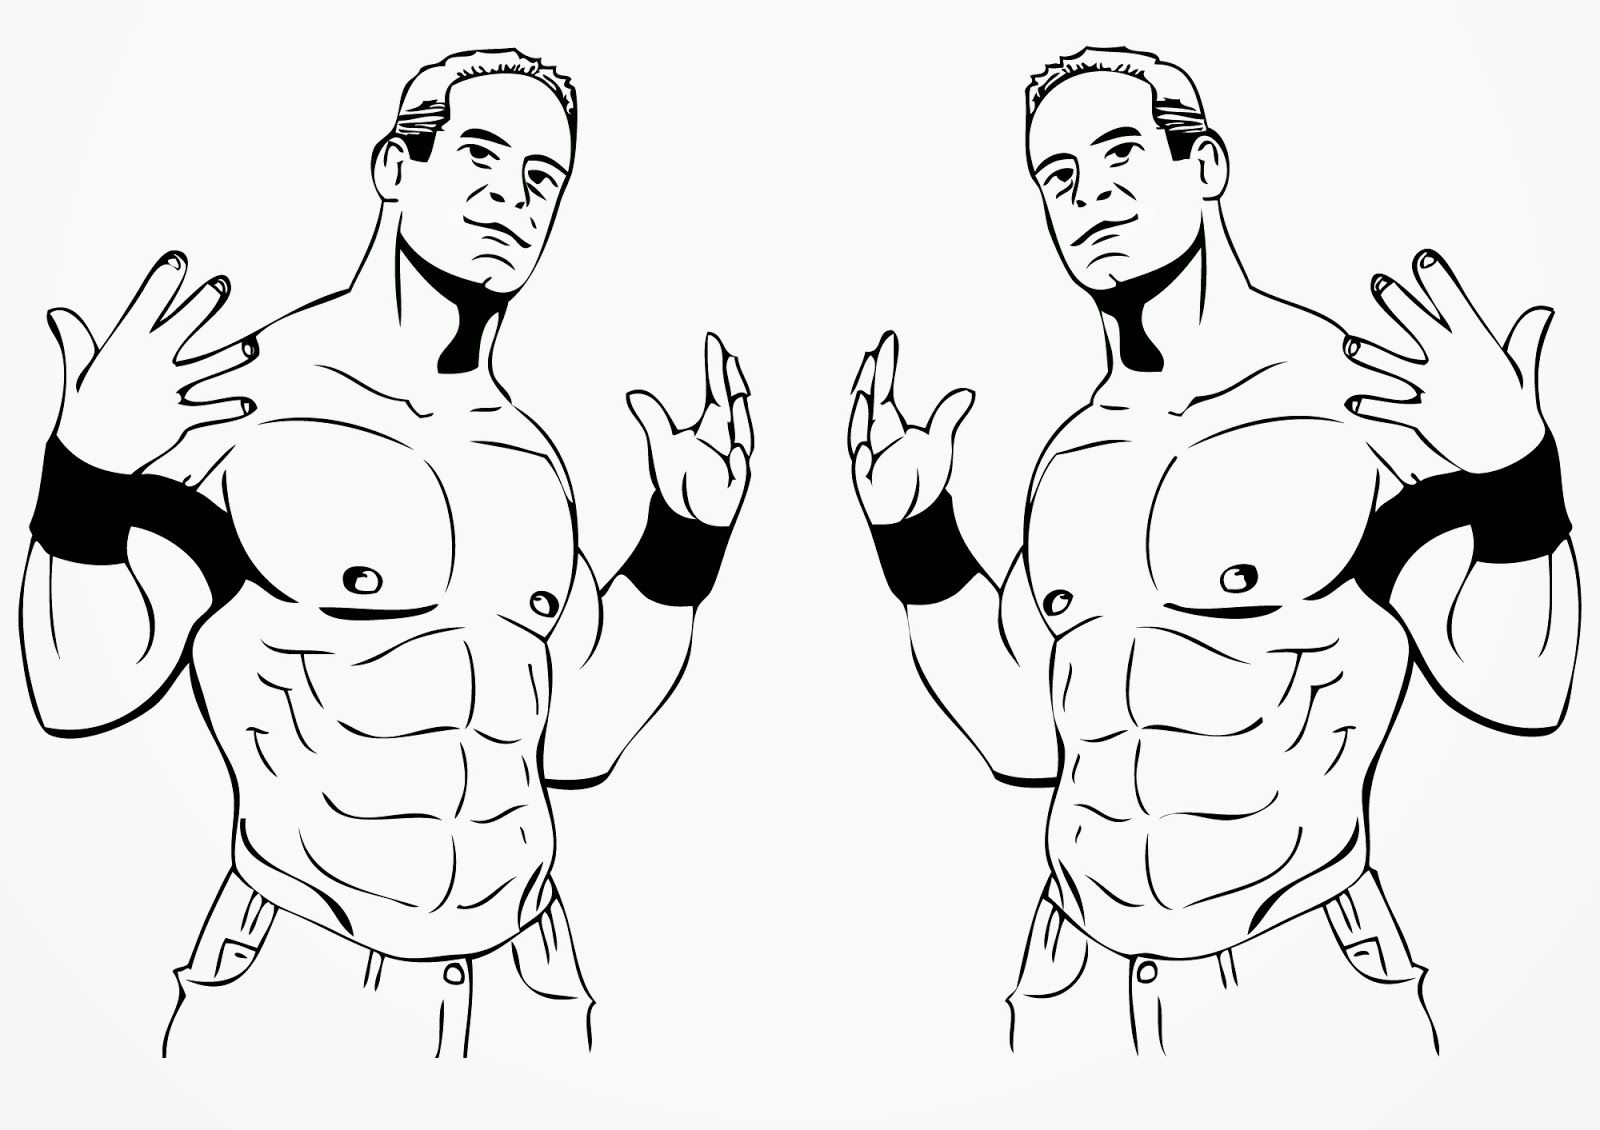 Handy John Cena Coloring Page Free Printable Coloring Pages ...